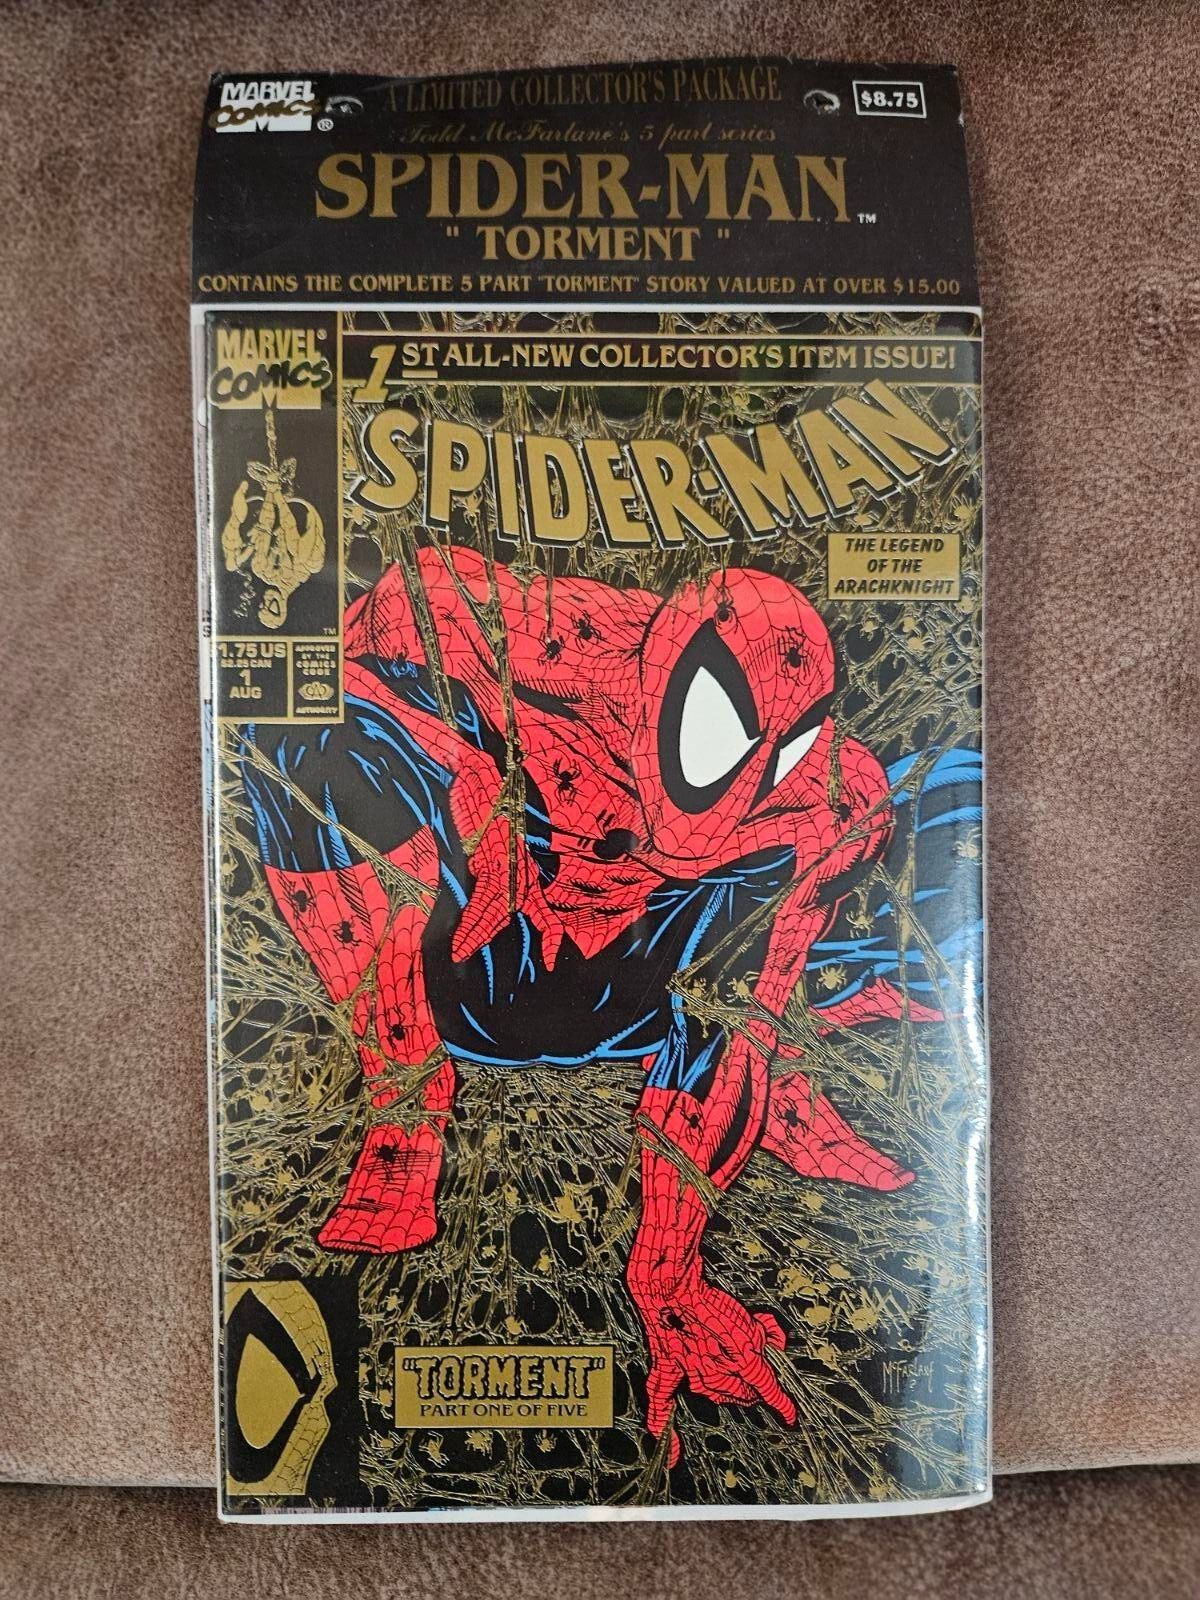 Spider-Man Torment Comics #1, #2, #3, #4, #5 FACTORY BAGGED/SEALED NEW Gold Cove